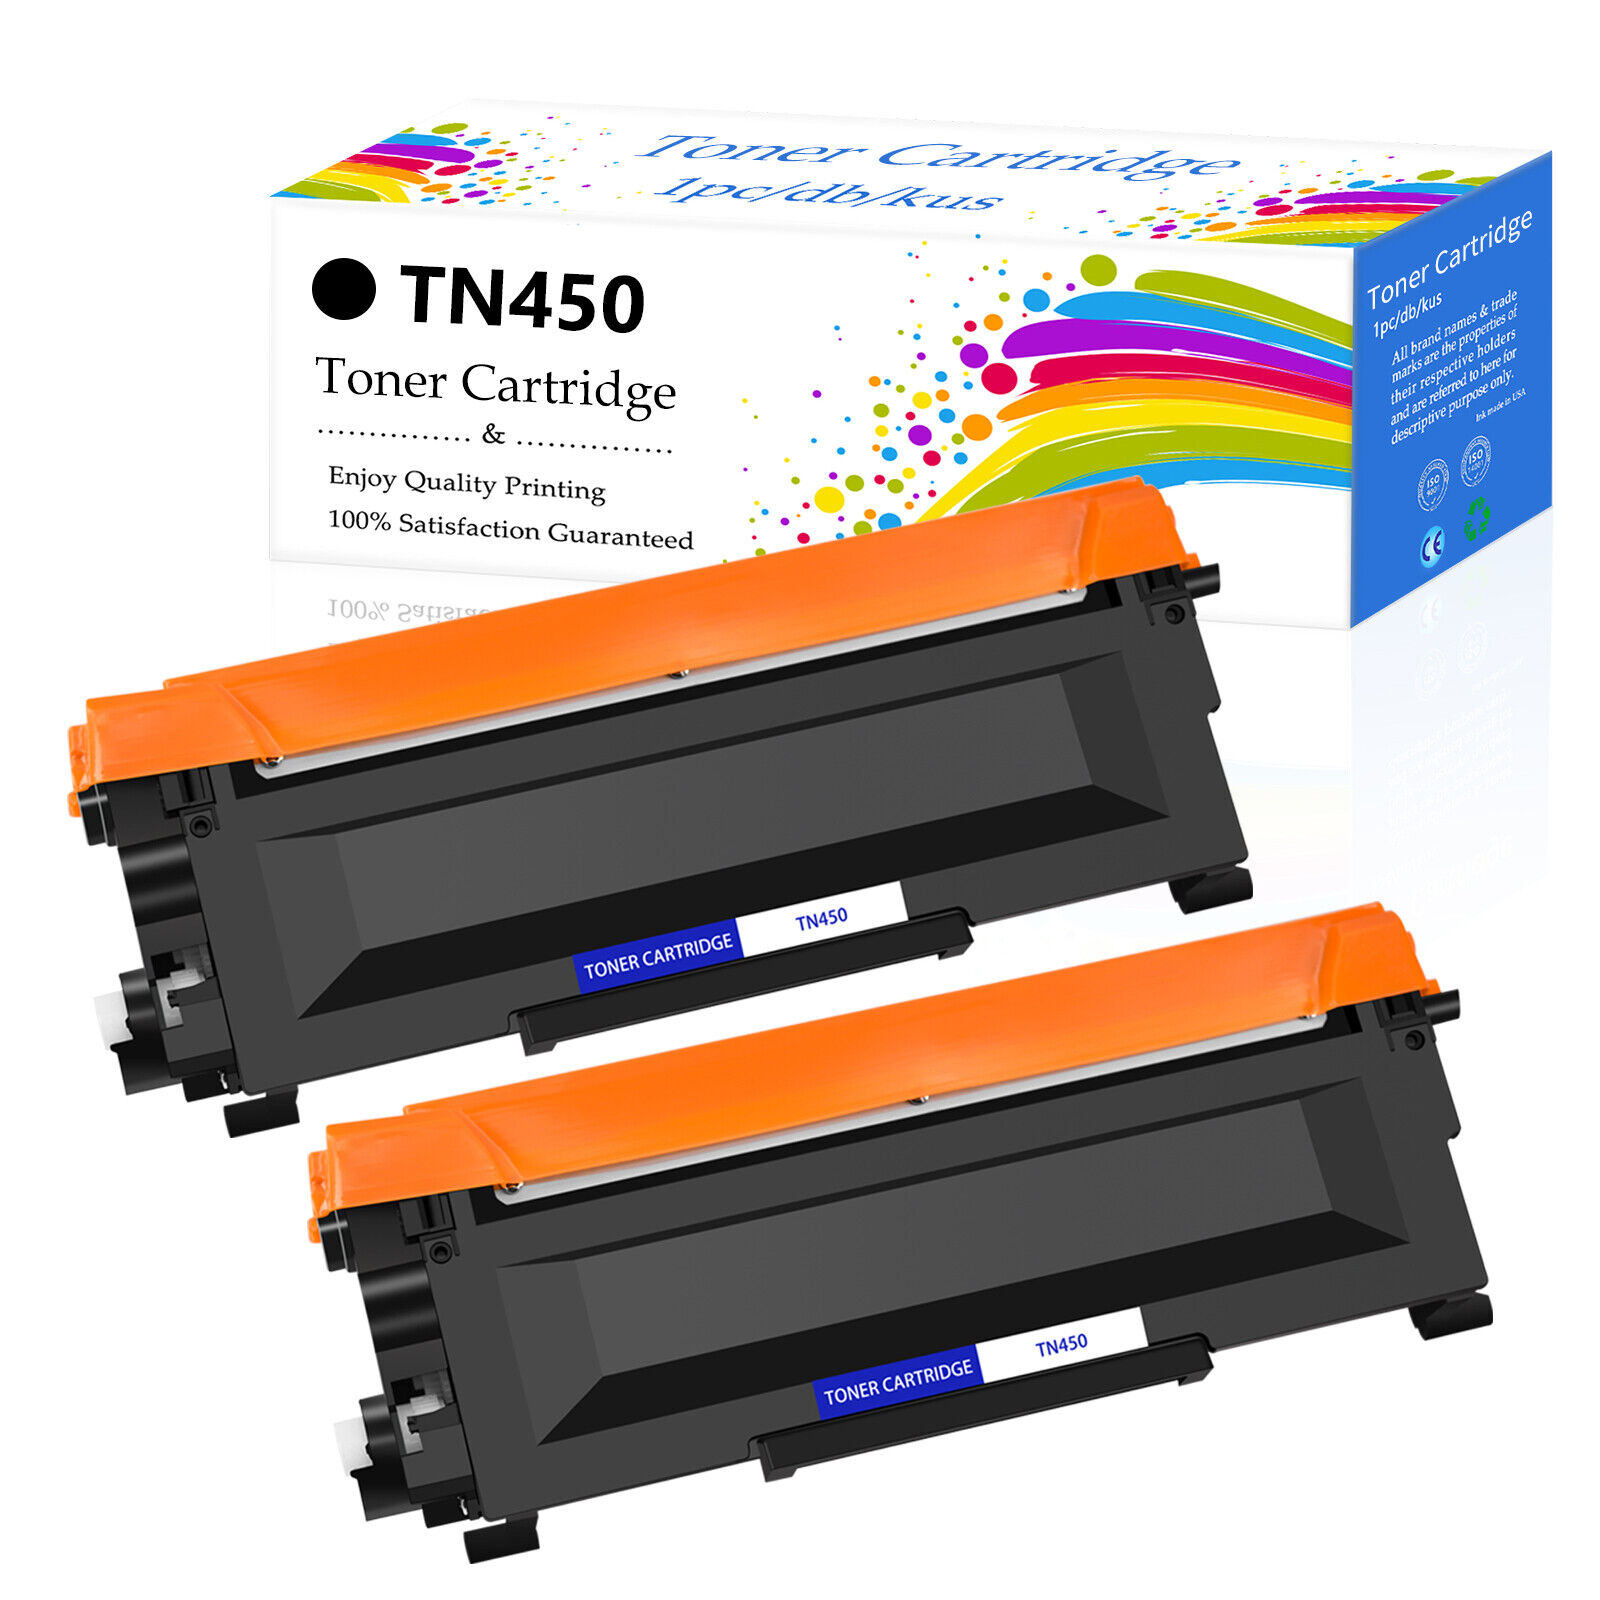 2PK New TN450 TN420 Toner Compatible for Brother FAX-2840 FAX-2940 HL-2132 Black